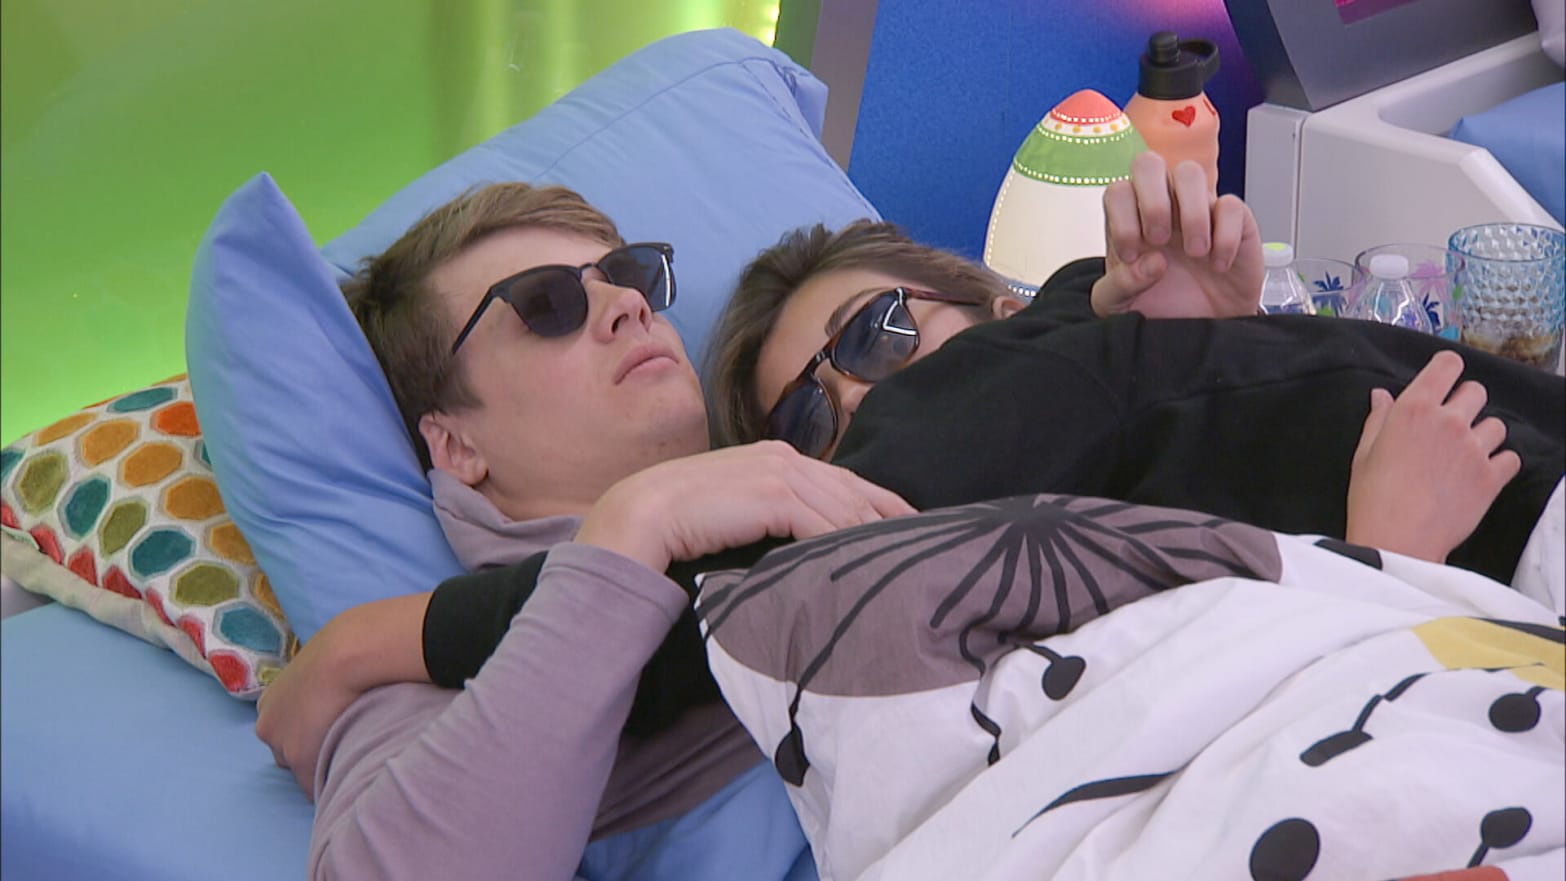 Big Brother Kyle and Alyssa Having Sex on Pool Floats Scarred Me for Life